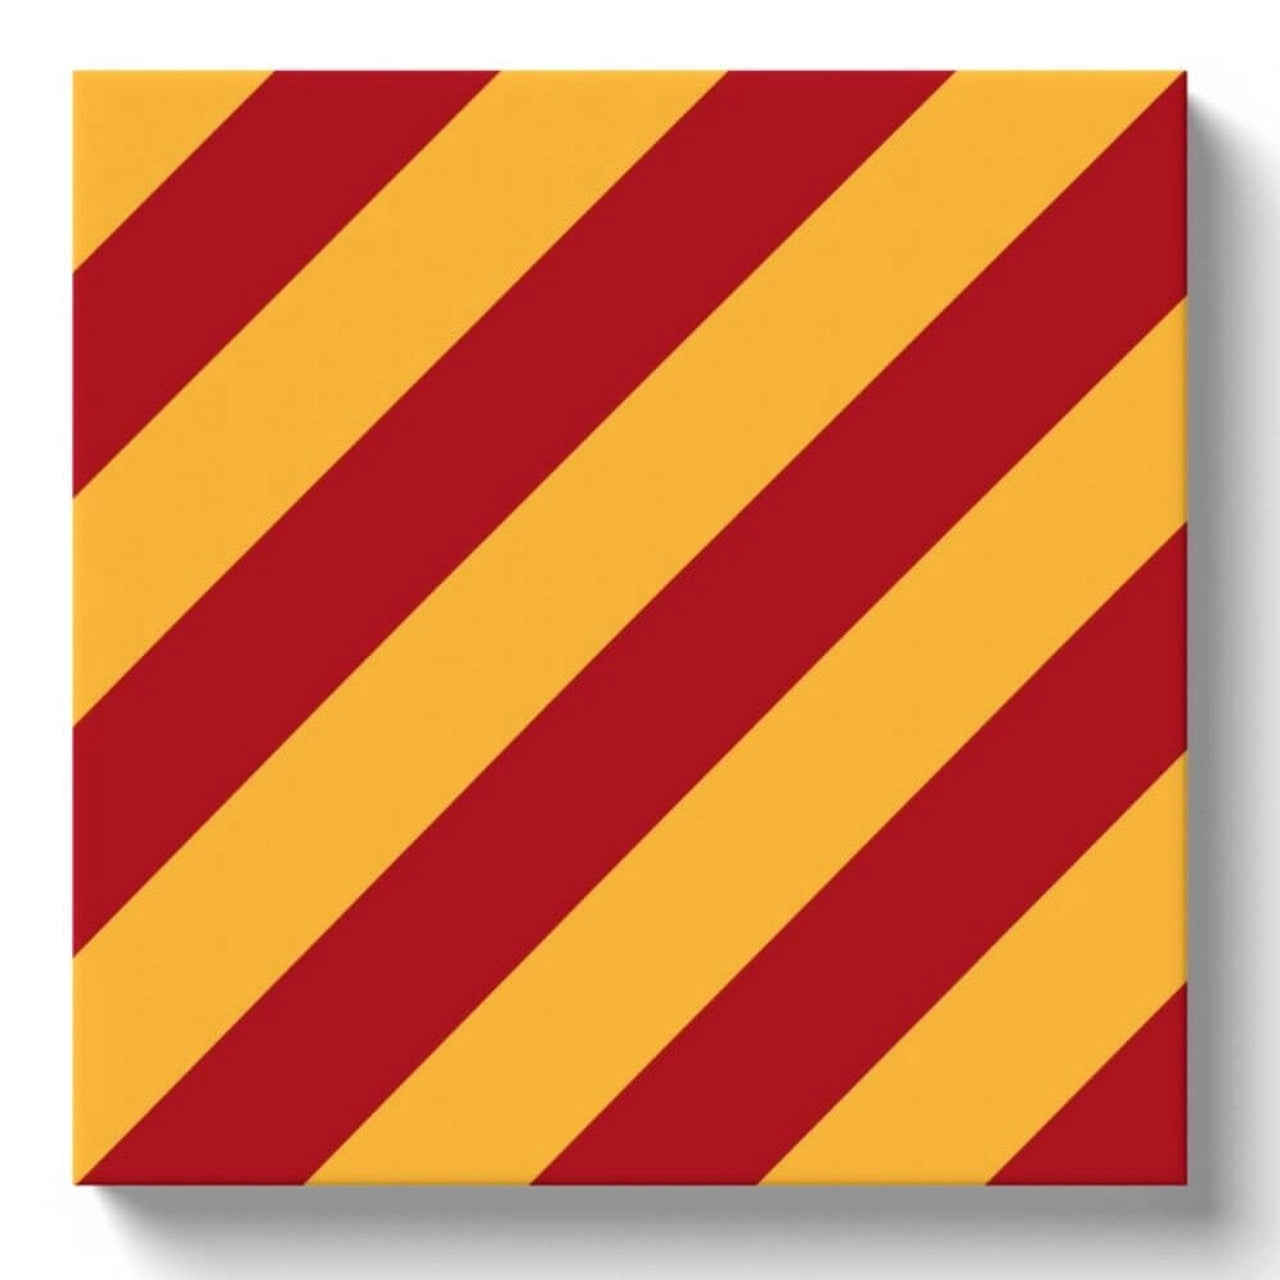 Nautical Signal Flag Canvas Wraps Posters, Prints, & Visual Artwork New England Trading Co 12" x 12" Y 